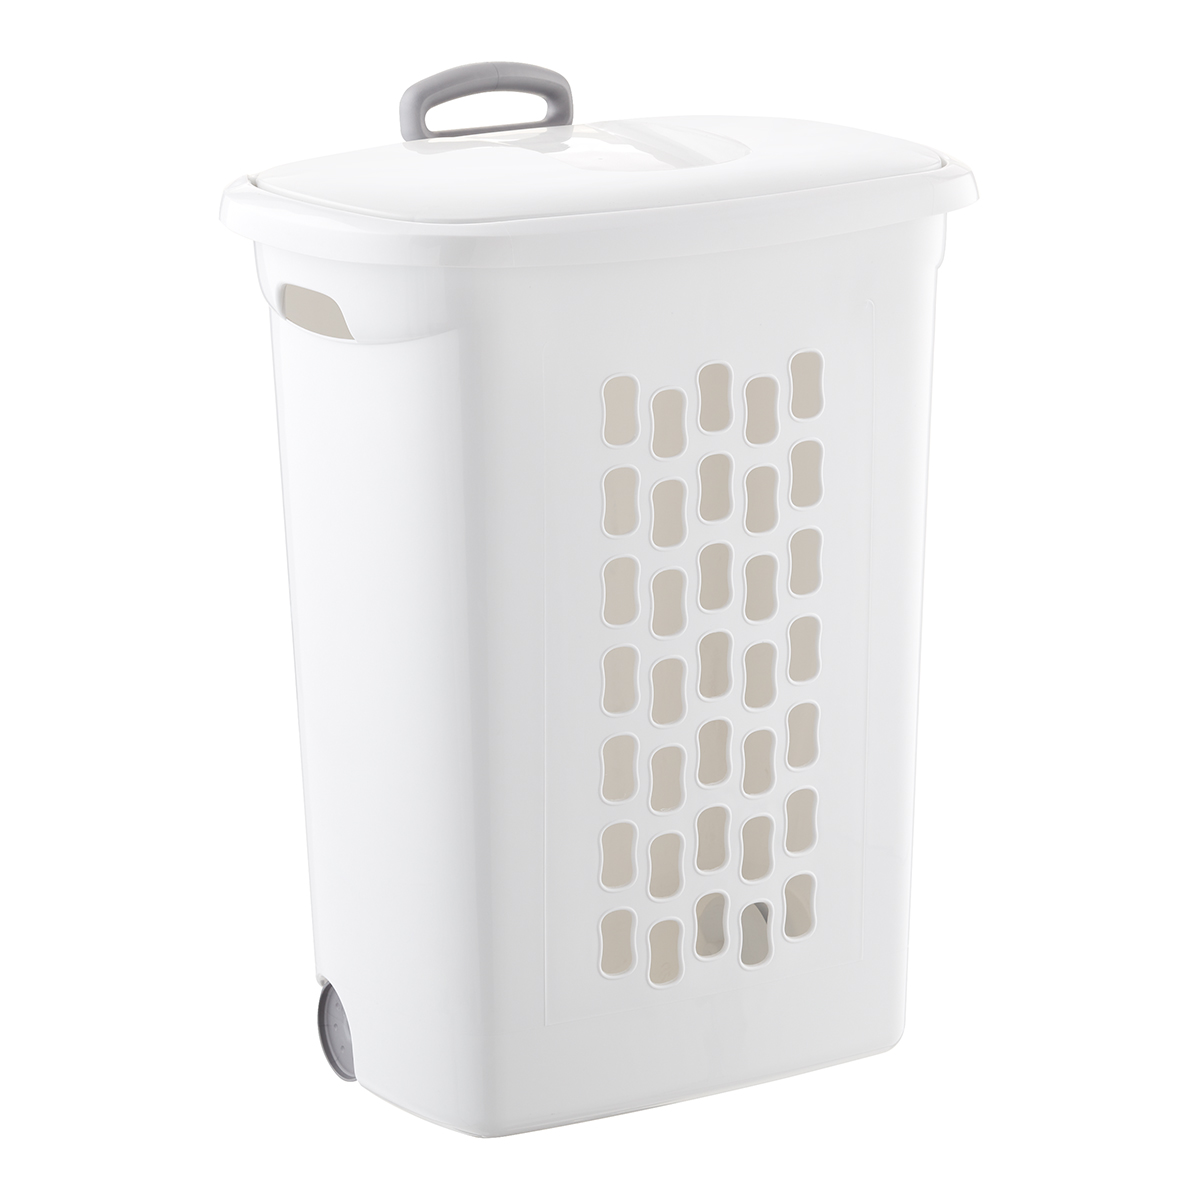 Rolling Hamper with Wheels | The Container Store